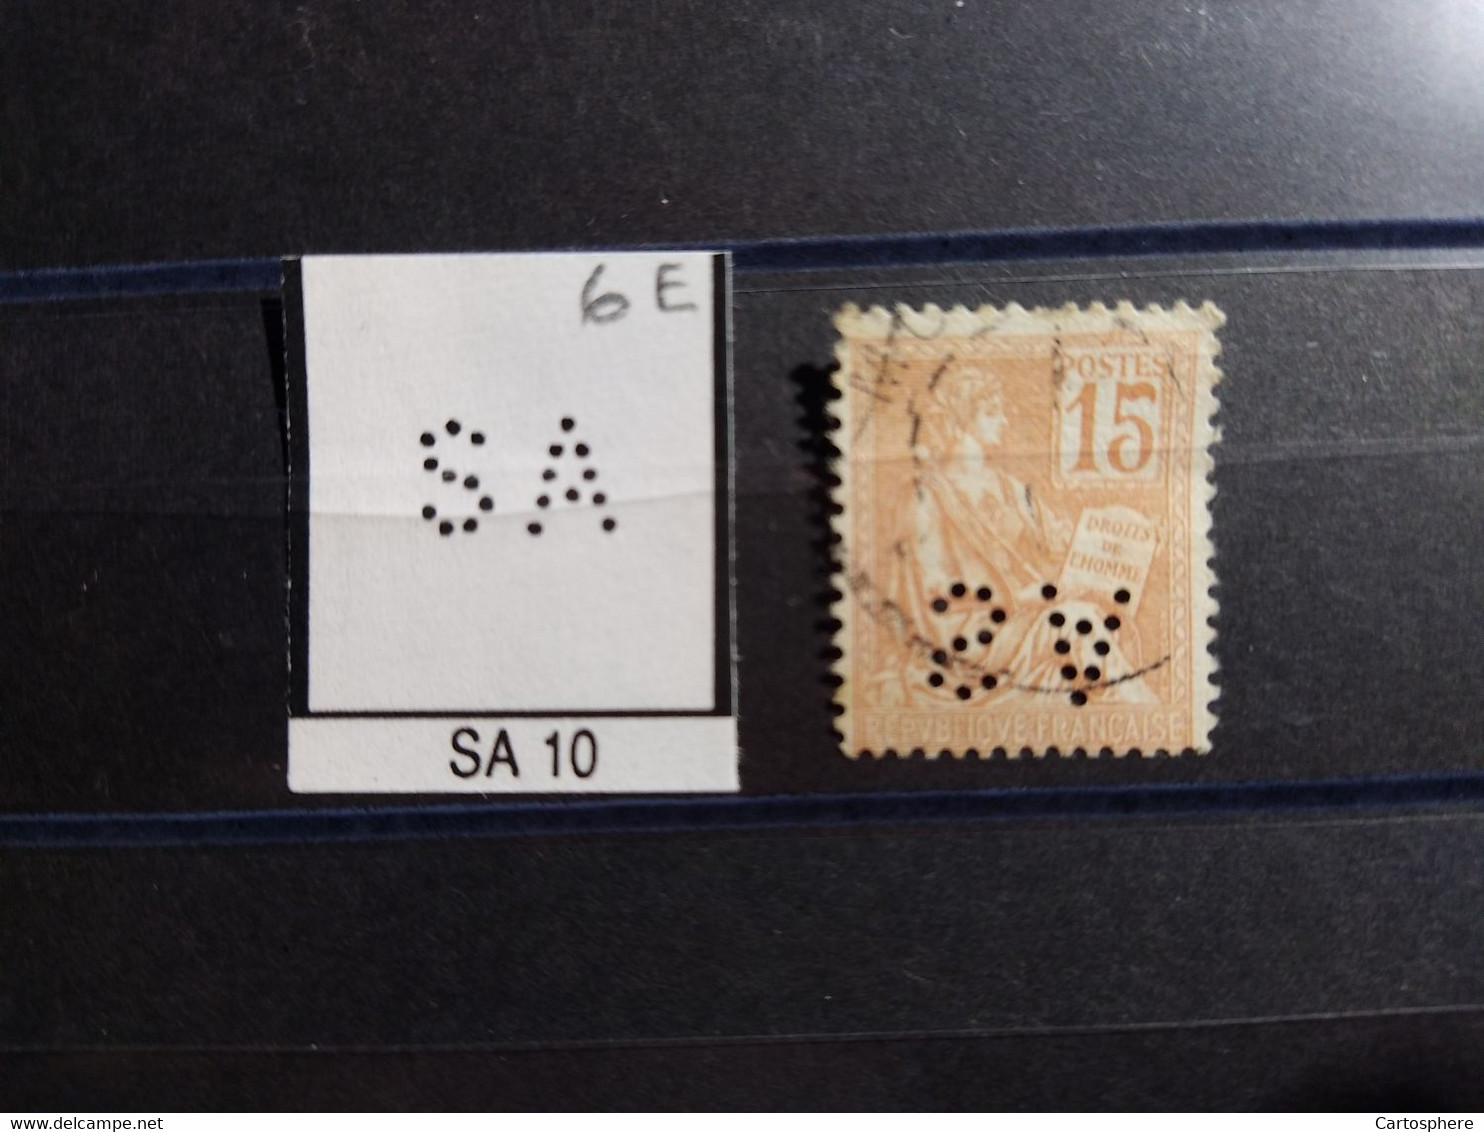 FRANCE TIMBRE SA 10 INDICE 6  SUR 117 PERFORE PERFORES PERFIN PERFINS PERFO PERFORATION PERFORIERT - Used Stamps